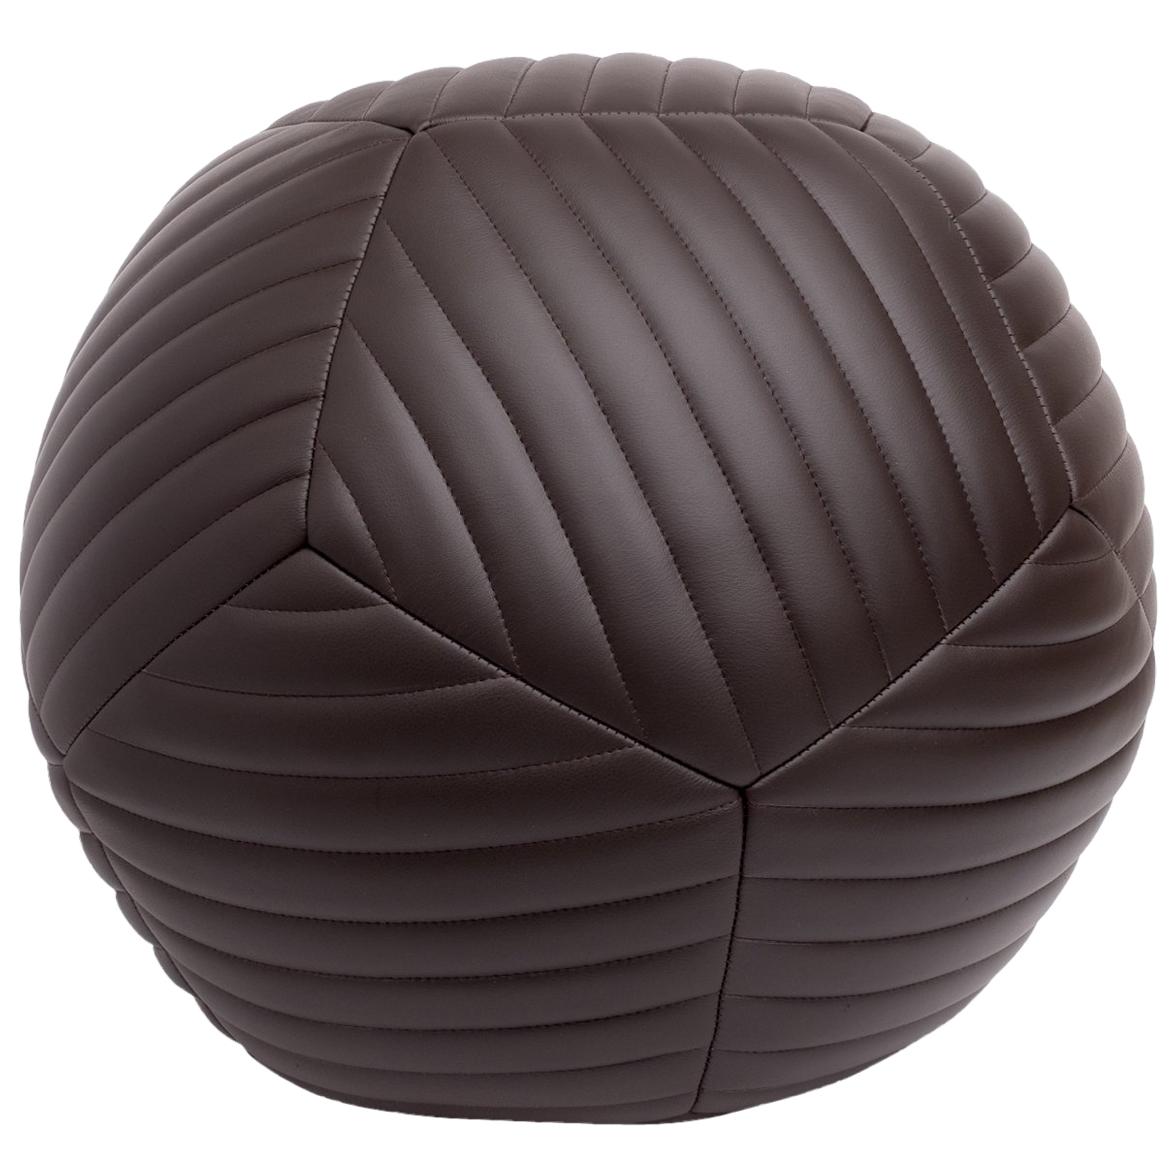 Banded Ottoman 18" in Chocolate Brown Leather by Moses Nadel